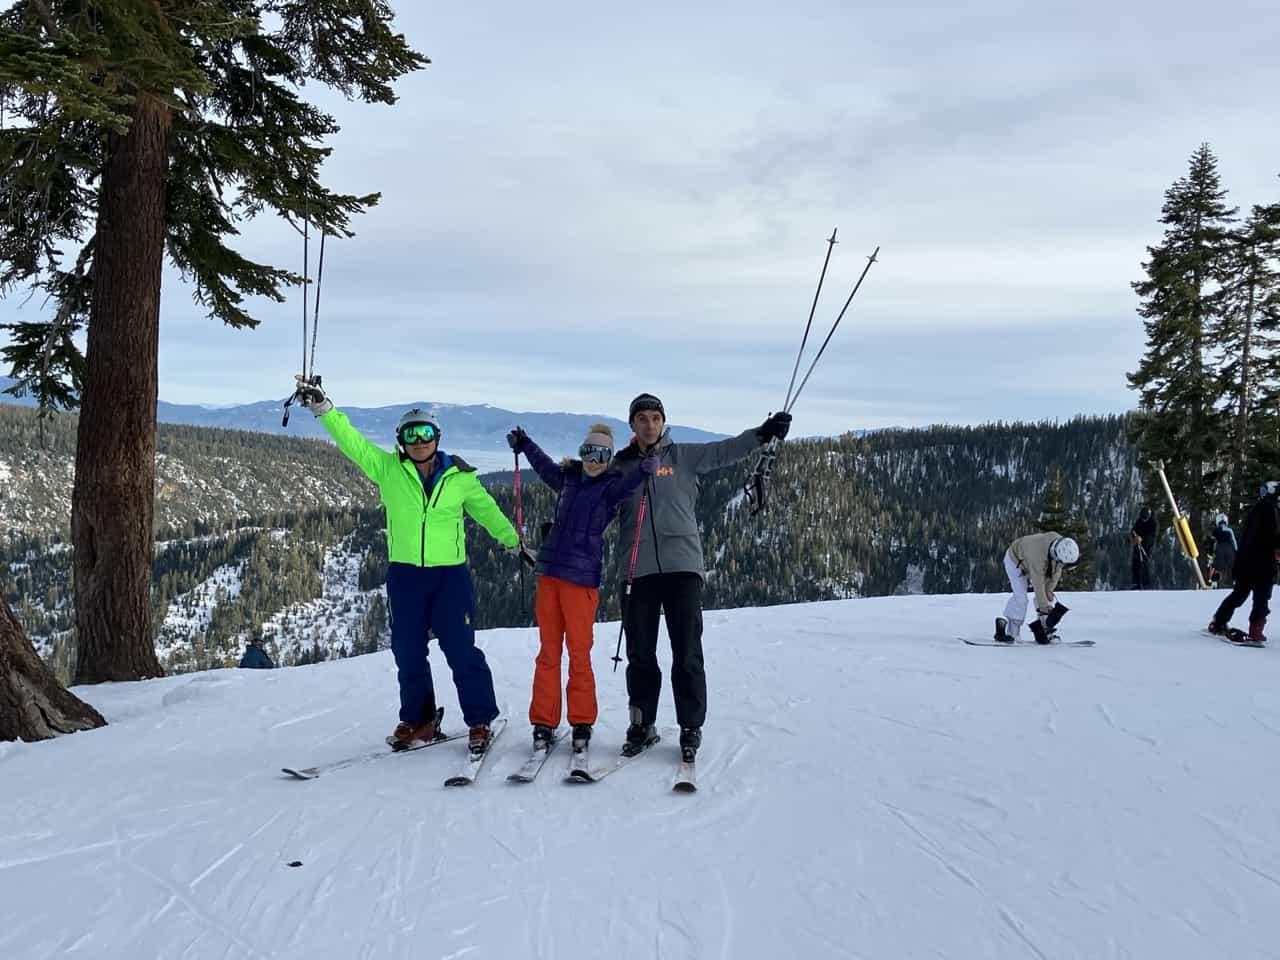 3 skiers celebrate at top of snowy mountain